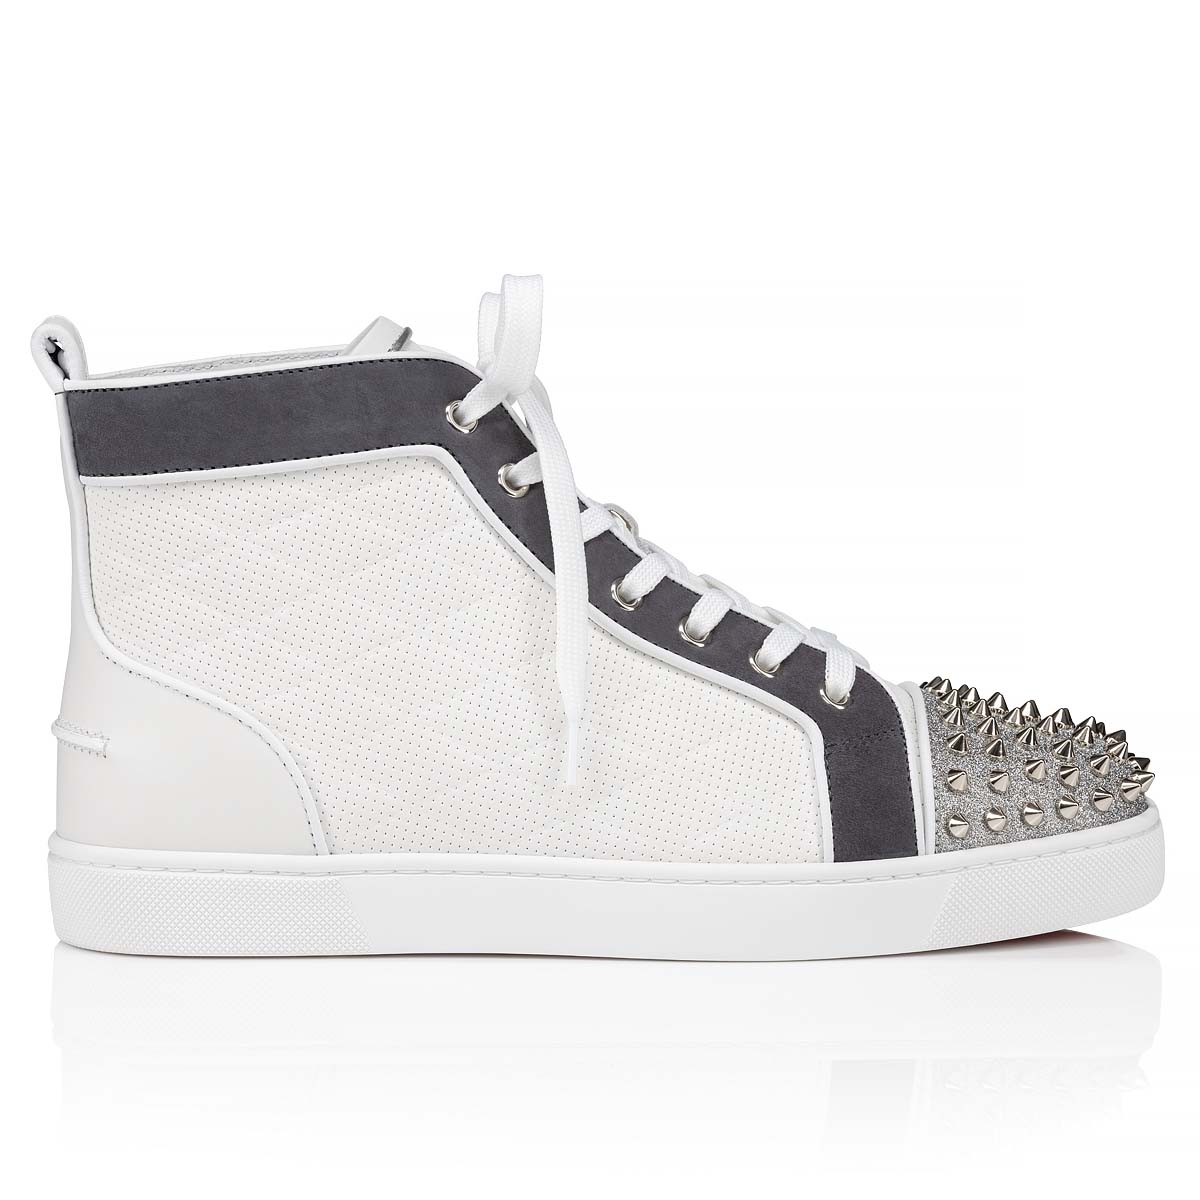 Christian Louboutin Black Leather Louis Spikes High Top Sneakers Size 41.5 Christian  Louboutin